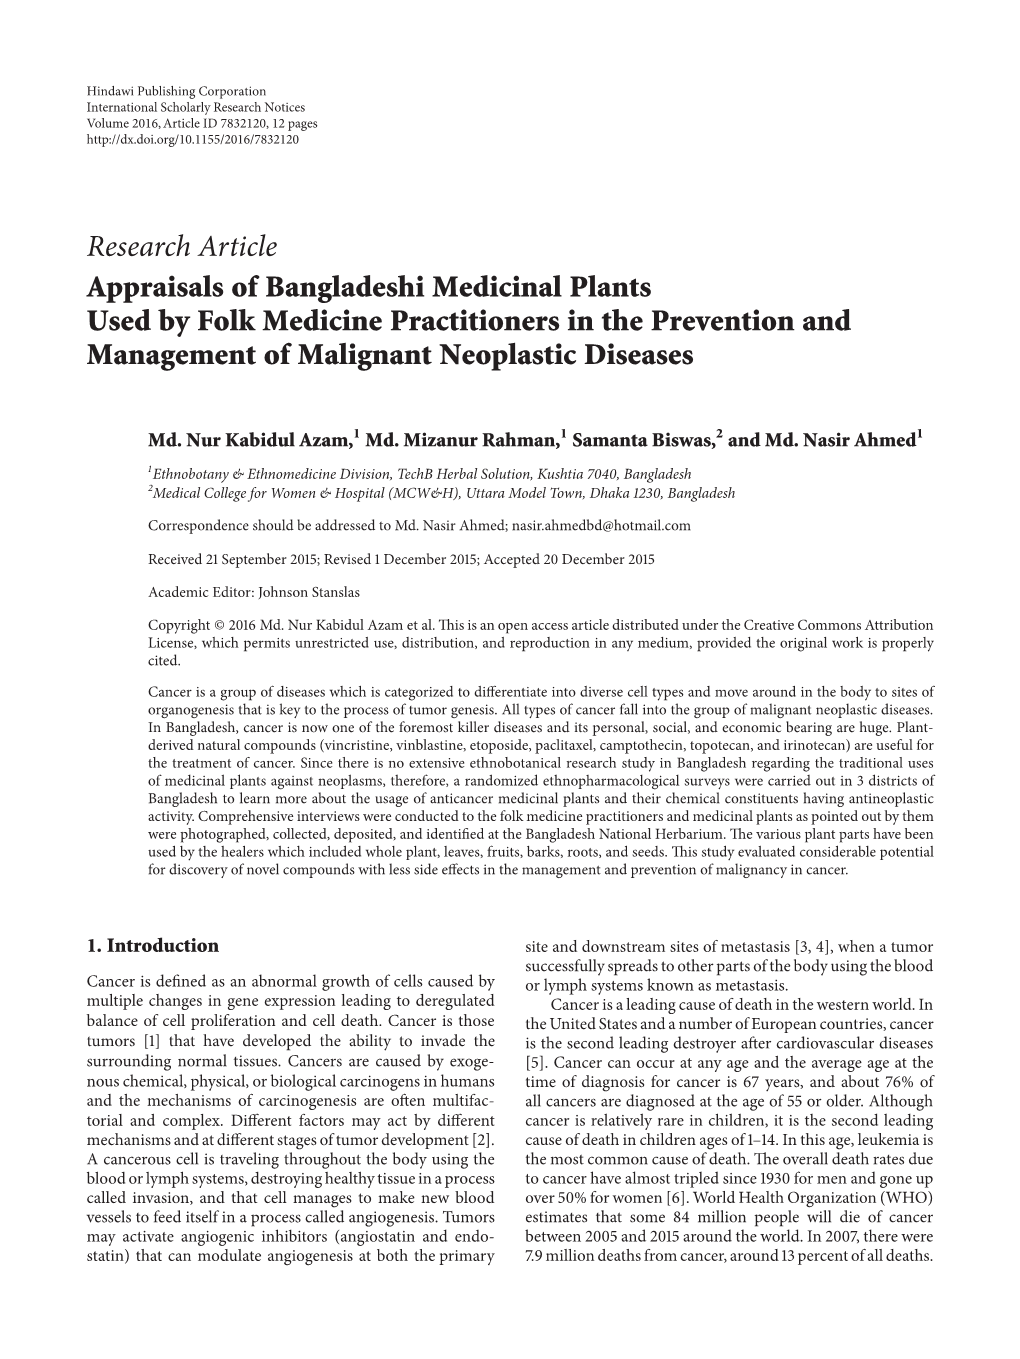 Research Article Appraisals of Bangladeshi Medicinal Plants Used by Folk Medicine Practitioners in the Prevention and Management of Malignant Neoplastic Diseases